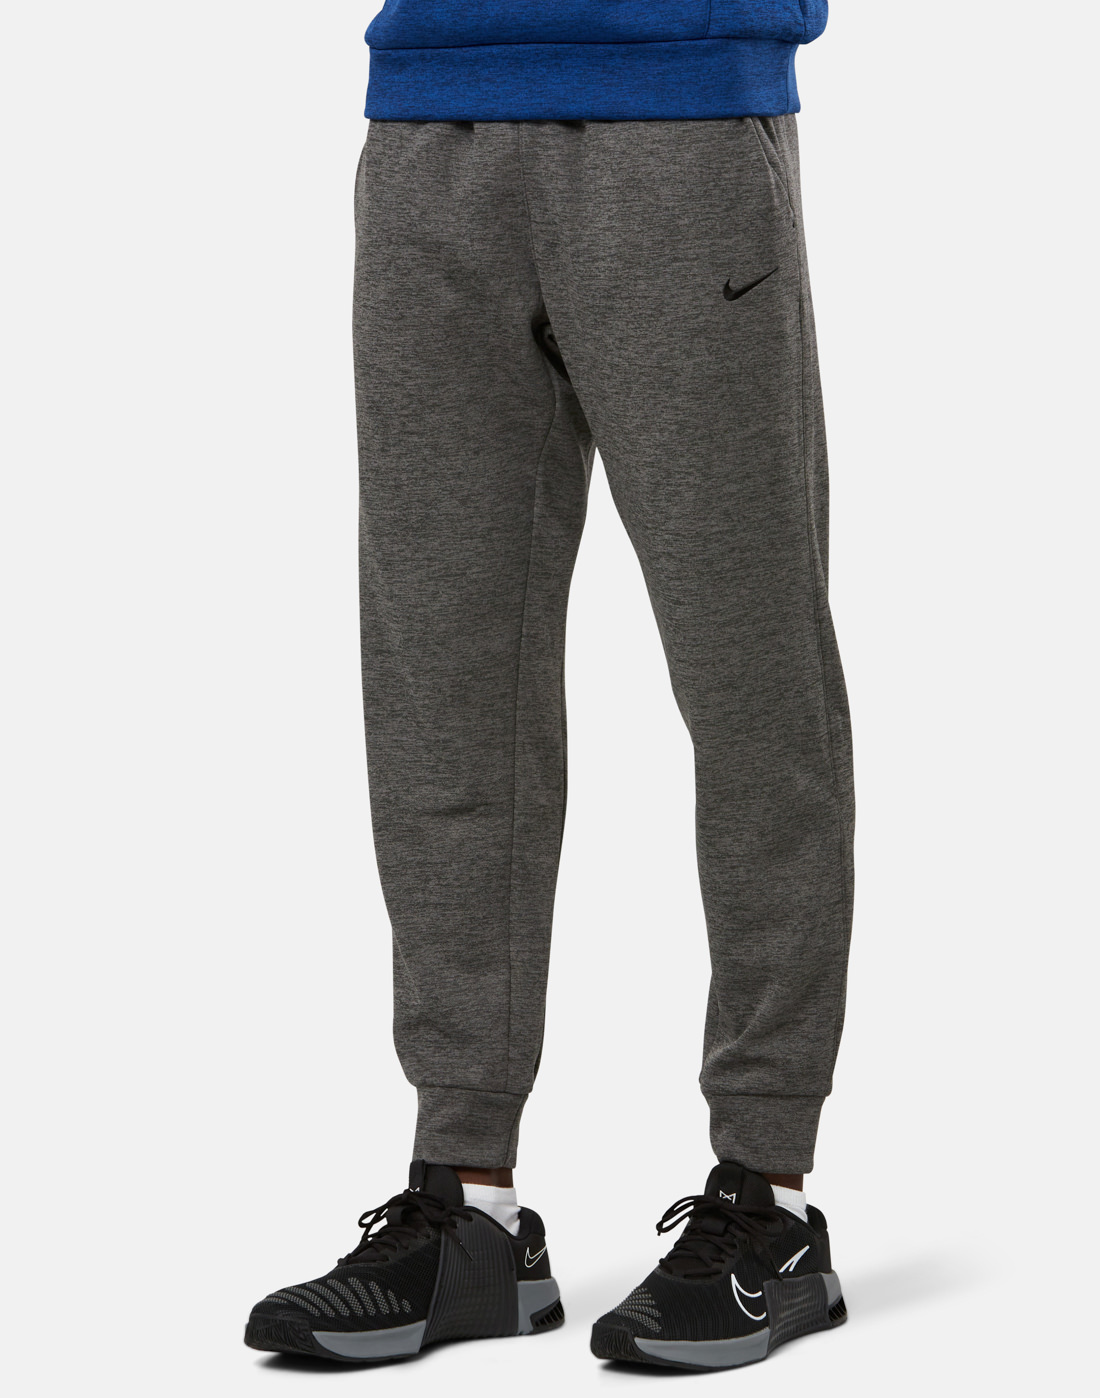 Nike Mens ThermaFit Taper Pants - Grey | Life Style Sports IE